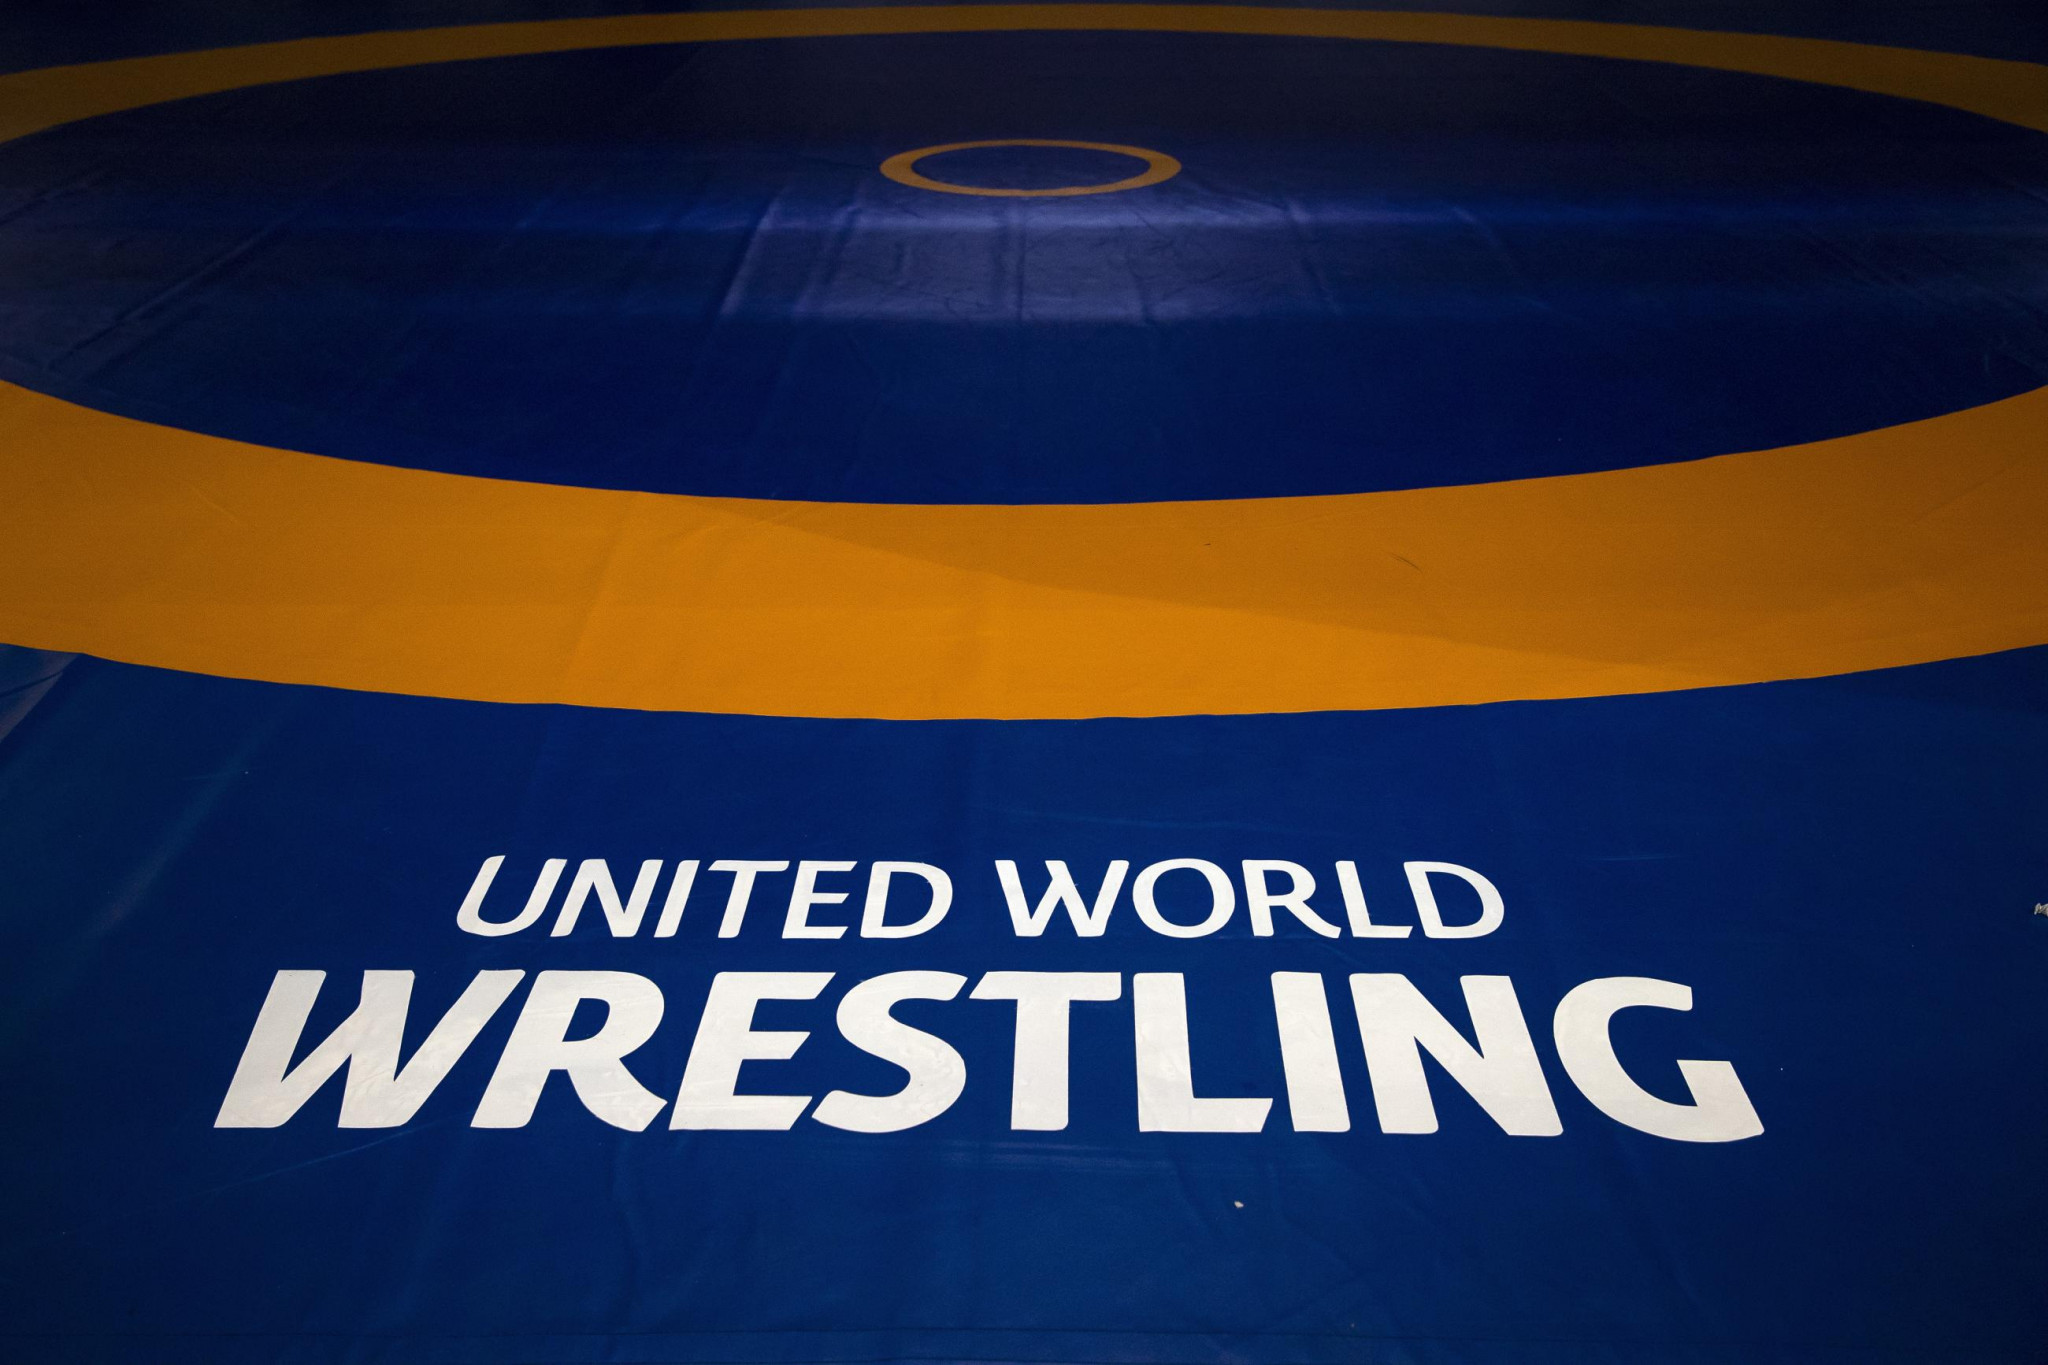 Nine Russian wrestlers have received two-year doping bans based on 2012 data following an ITA case on behalf of United World Wrestling ©UWW